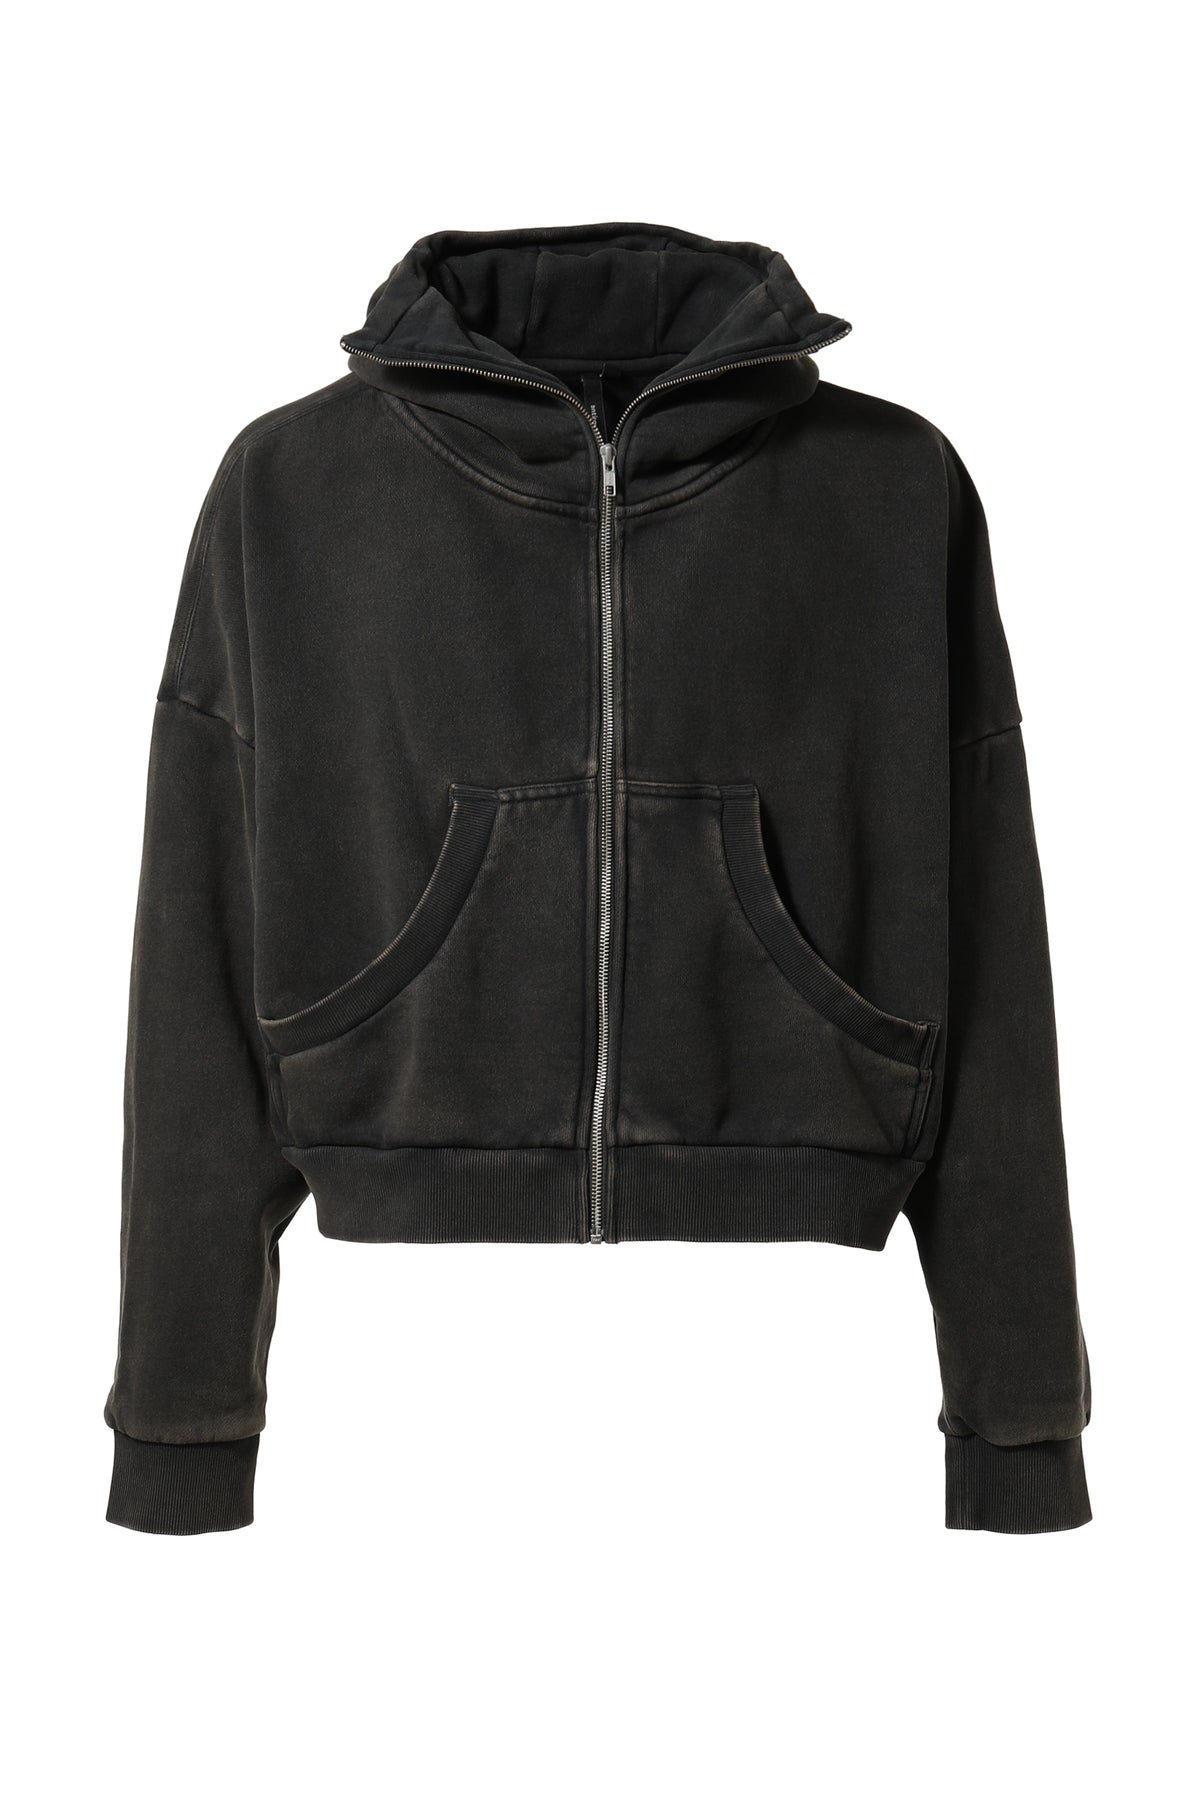 FULL ZIP / WASHED BLK